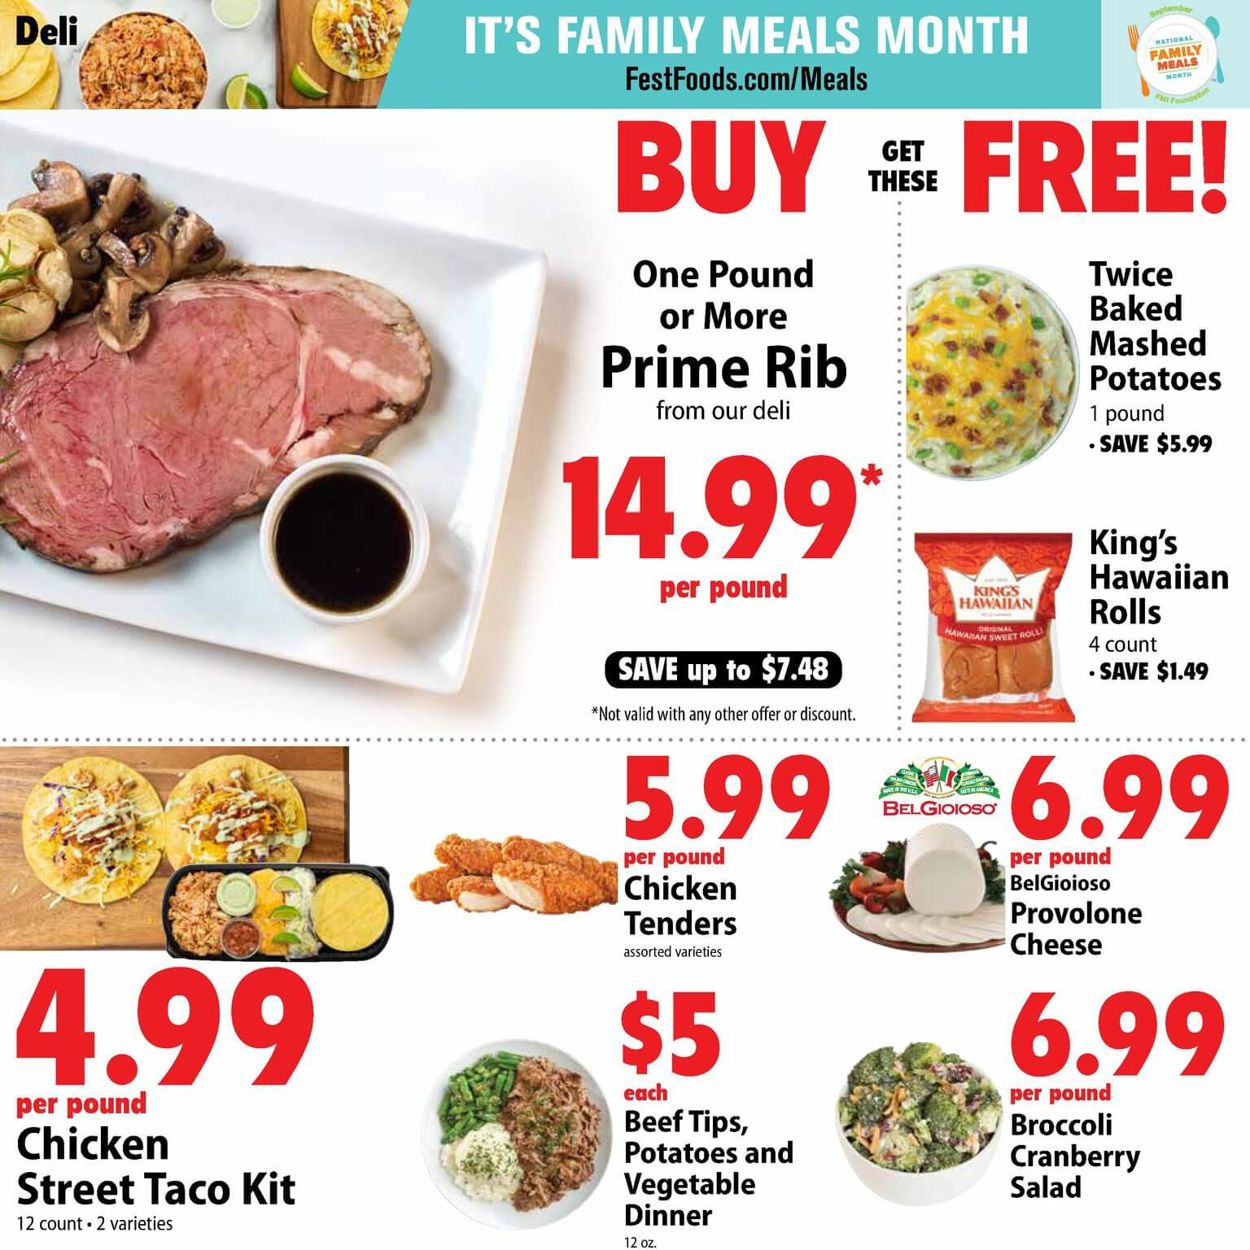 Festival Foods Current weekly ad 09/18 - 09/24/2019 [5] - frequent-ads.com